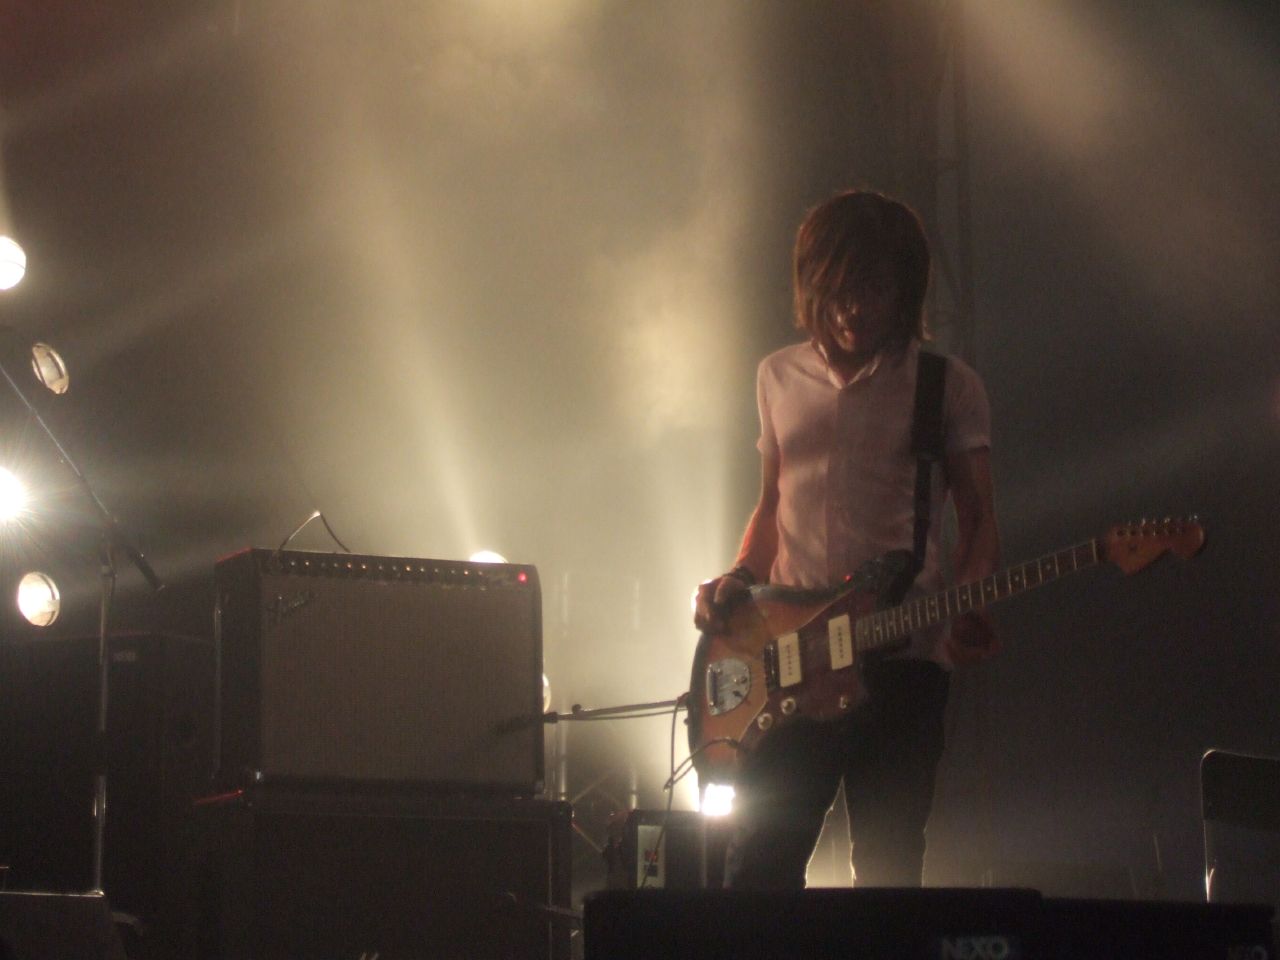 a young man is playing a guitar on stage